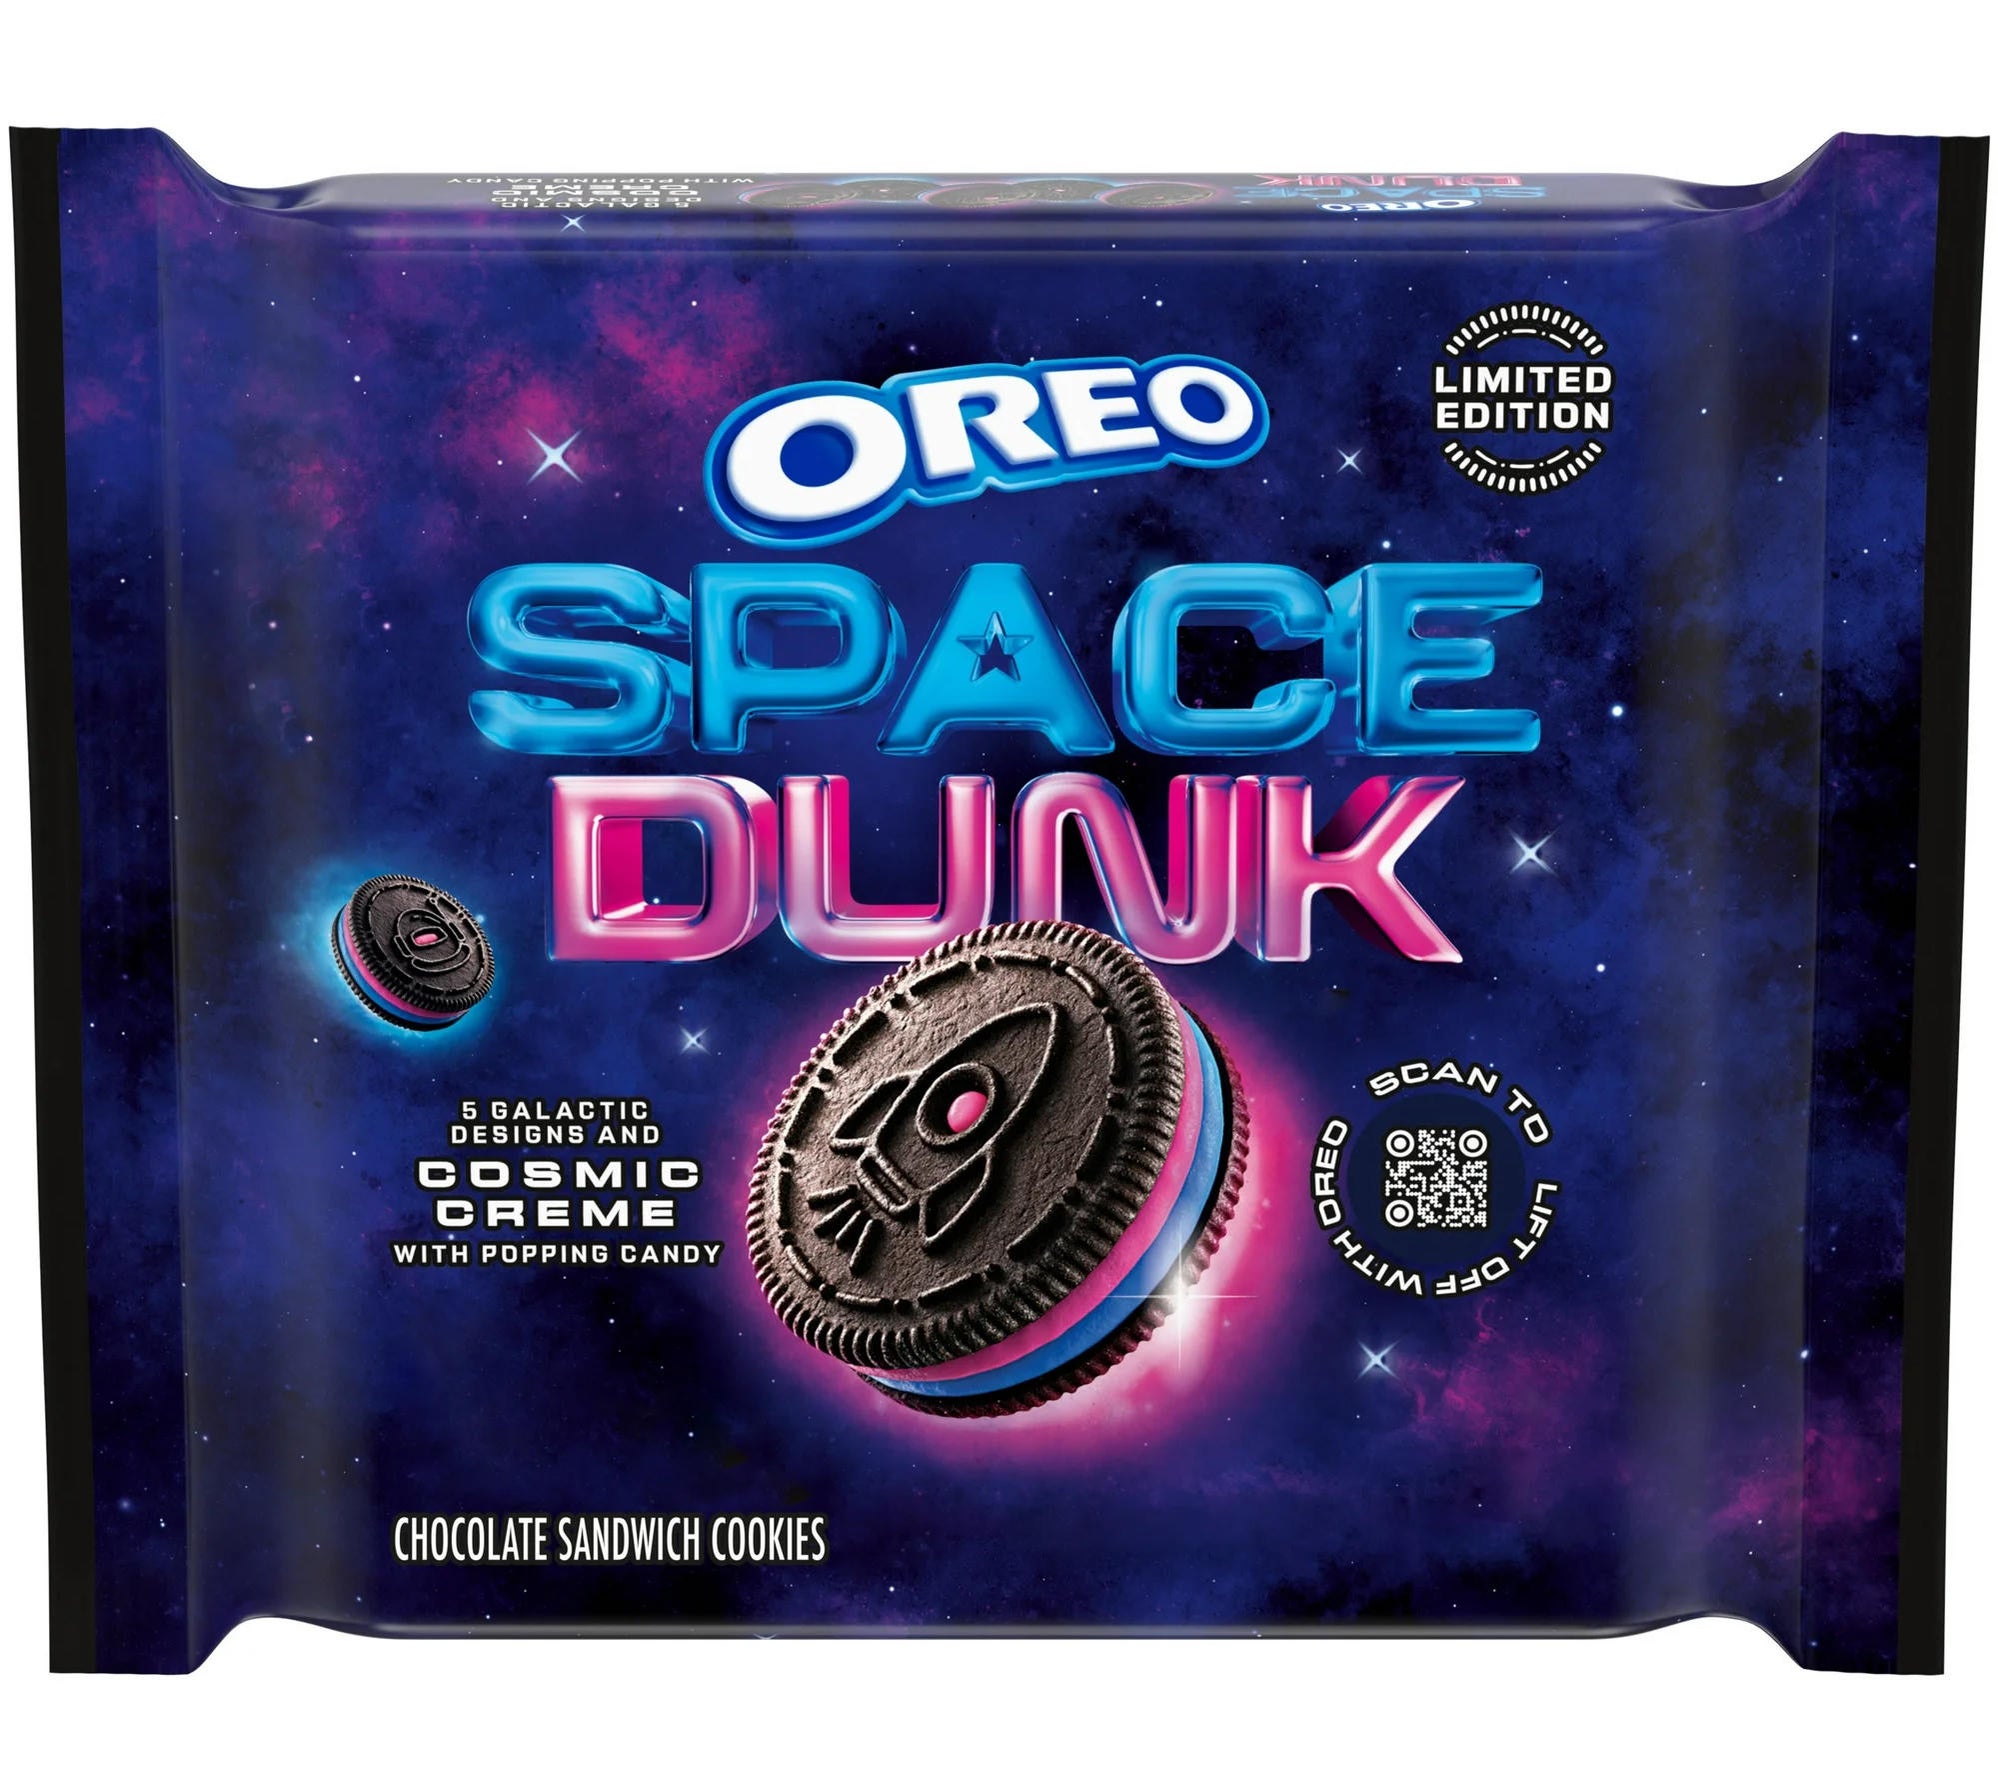 Oreo Space Dunk Cookies Could Actually Send You To The Edge Of Space